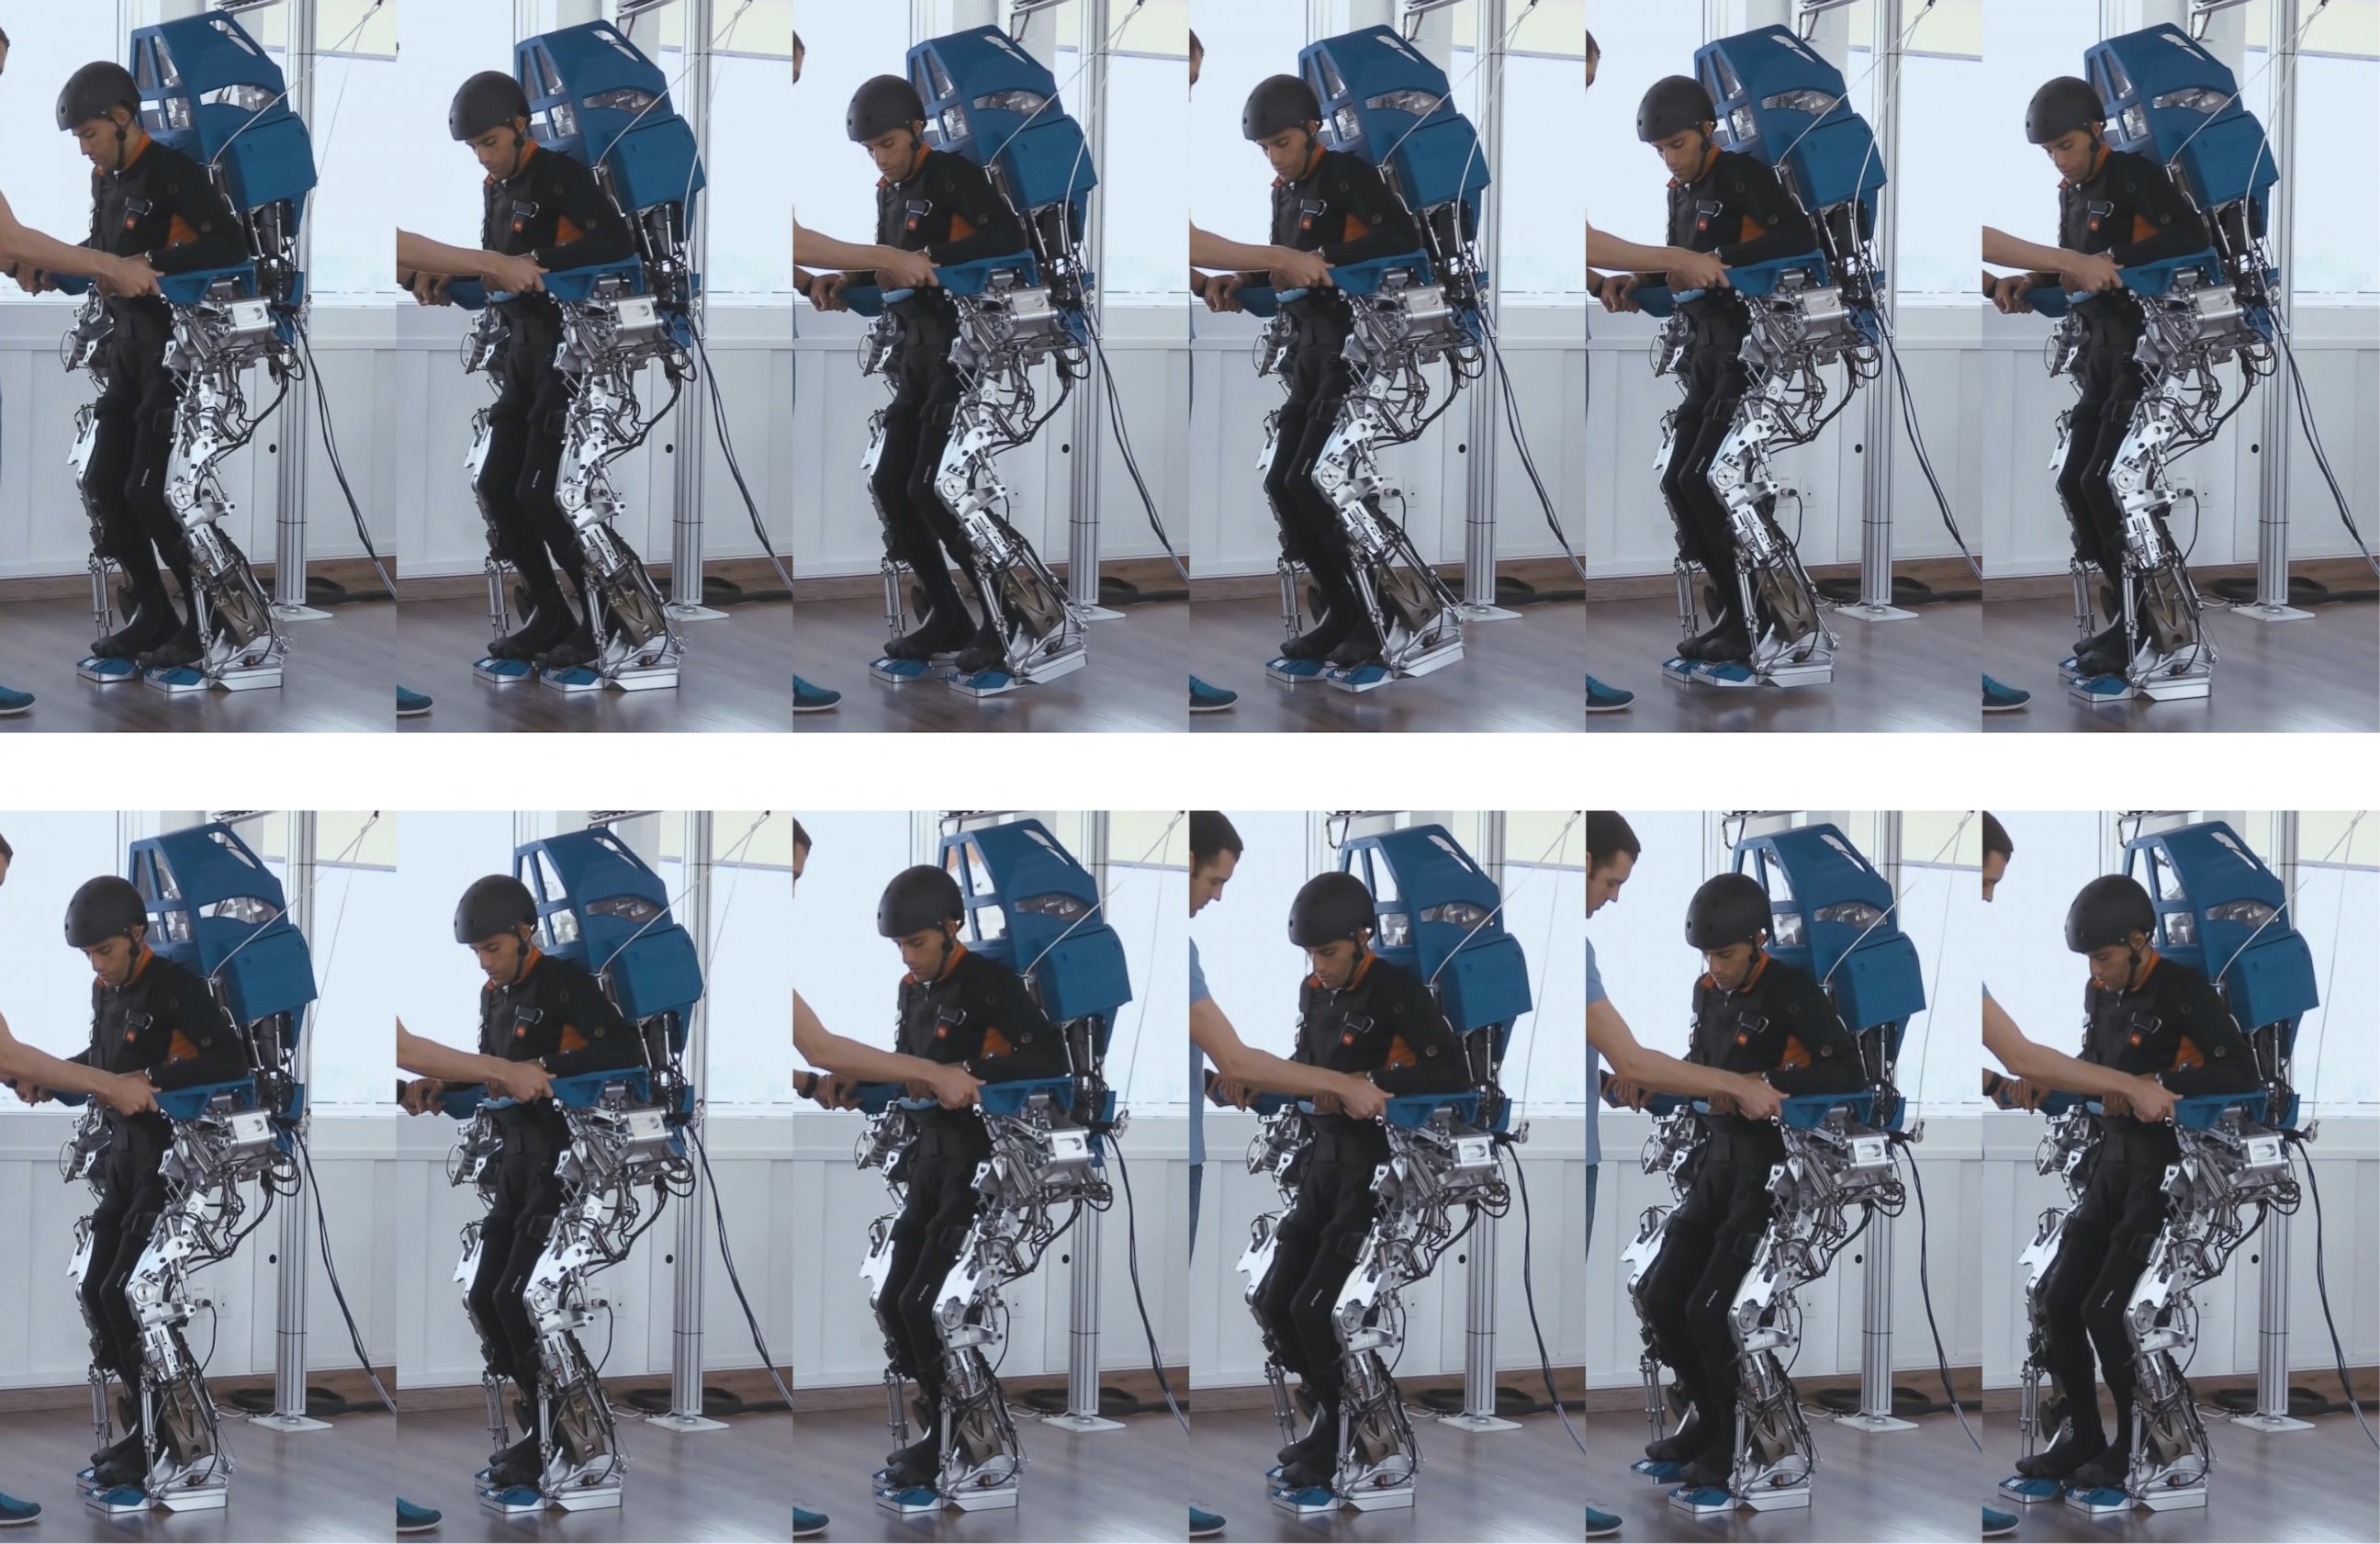 PHOTO: Researchers at Duke University were able to return some muscle movement and sensation in paraplegic patients by after simultaneously using virtual reality and brain-controlled robotics to attempt an experimental rehab therapy.